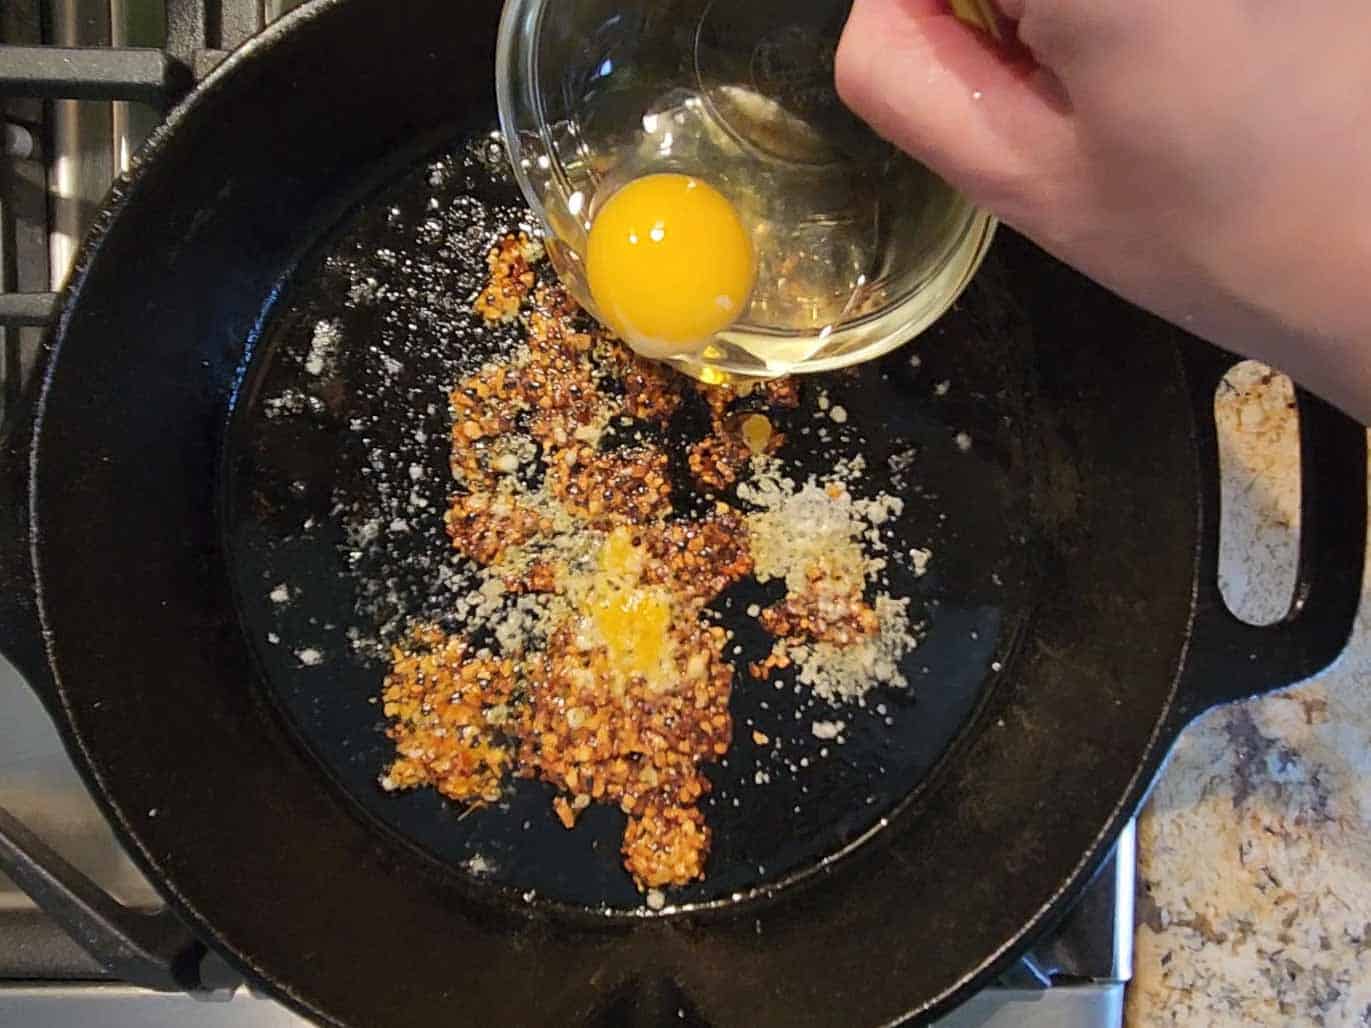 An egg is poured into a hot skillet for frying with spices.